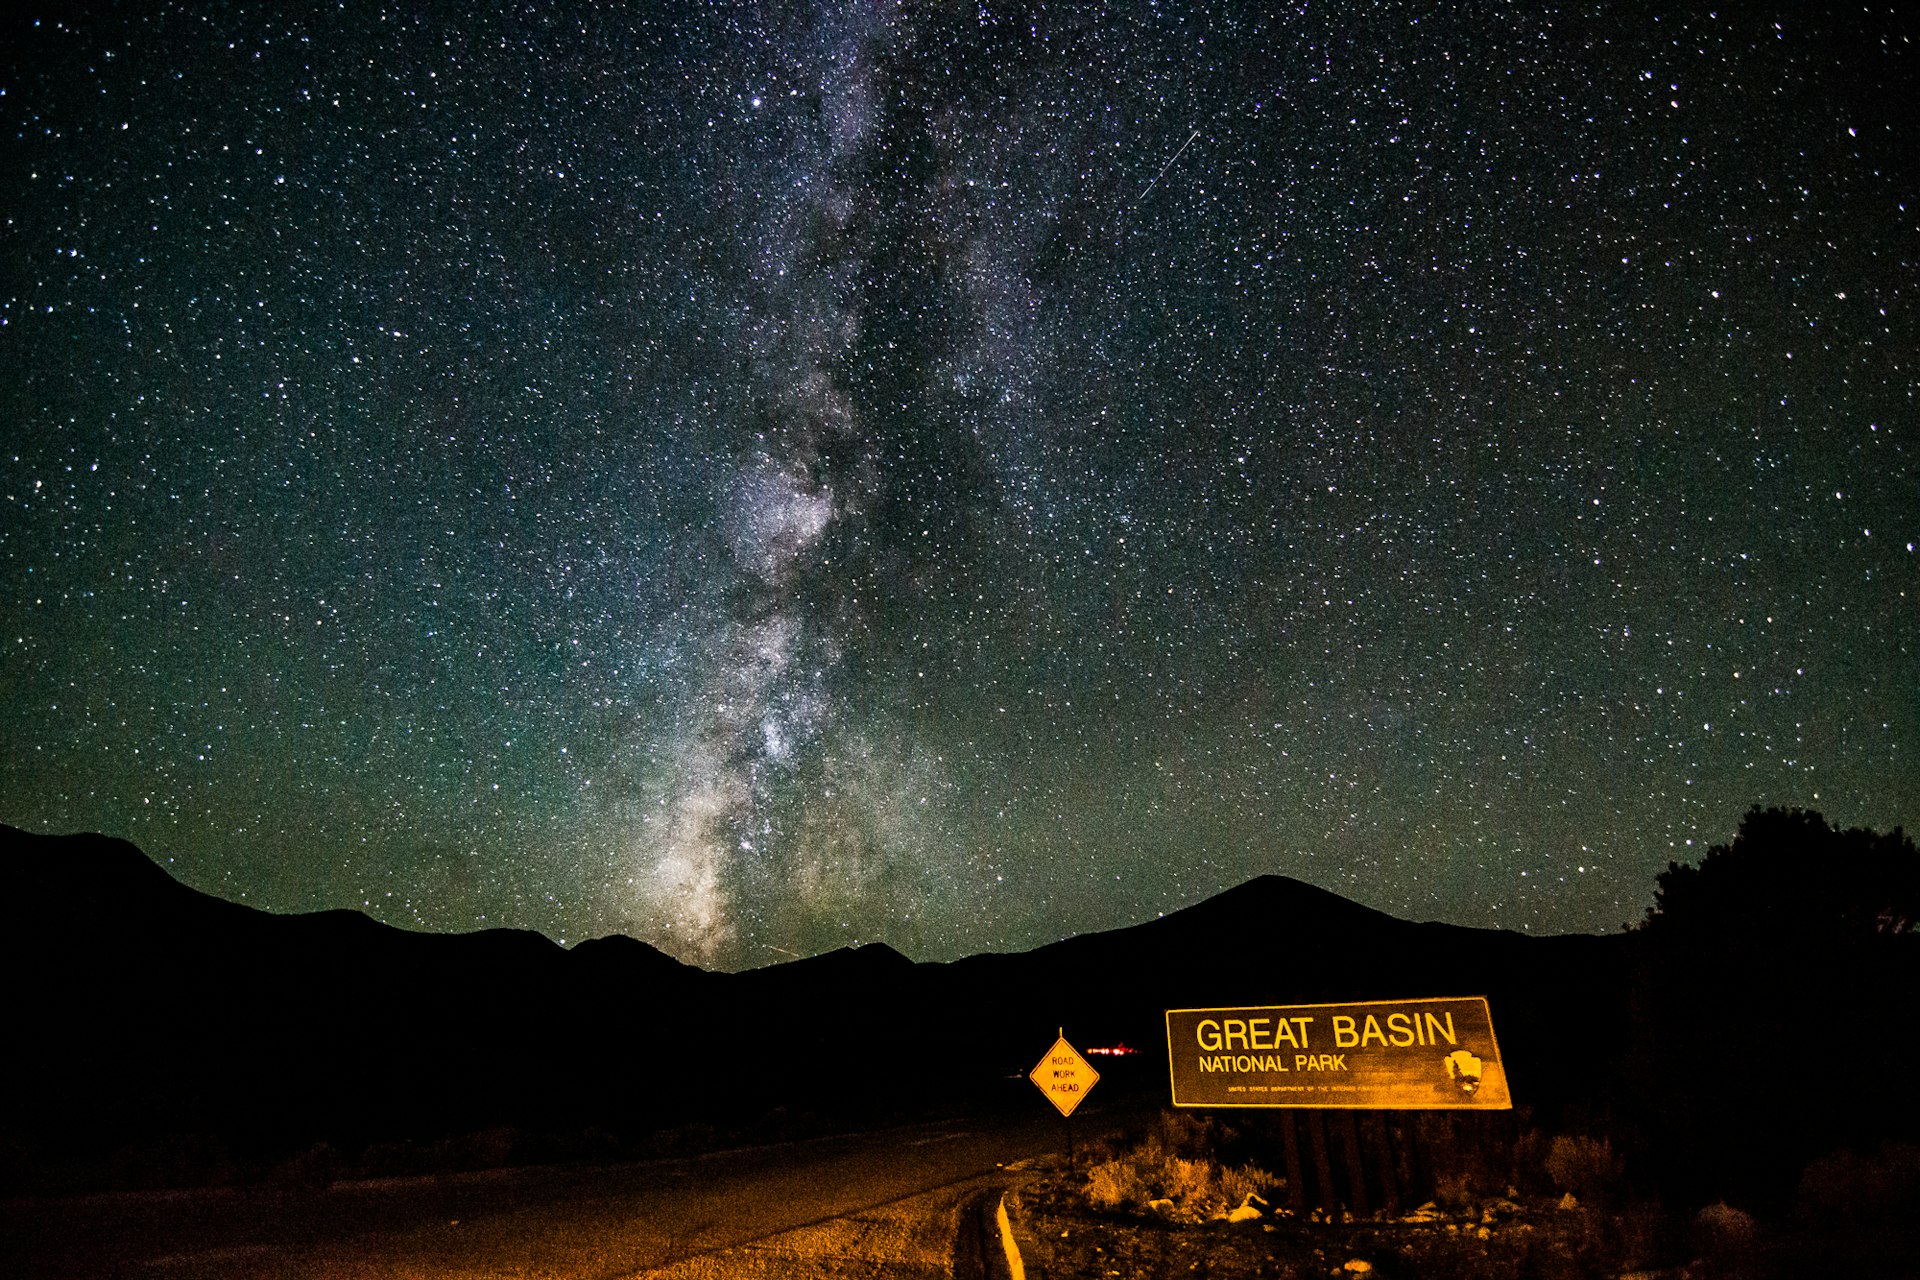 Information Sign On Road By Silhouette Mountains Against Star Field